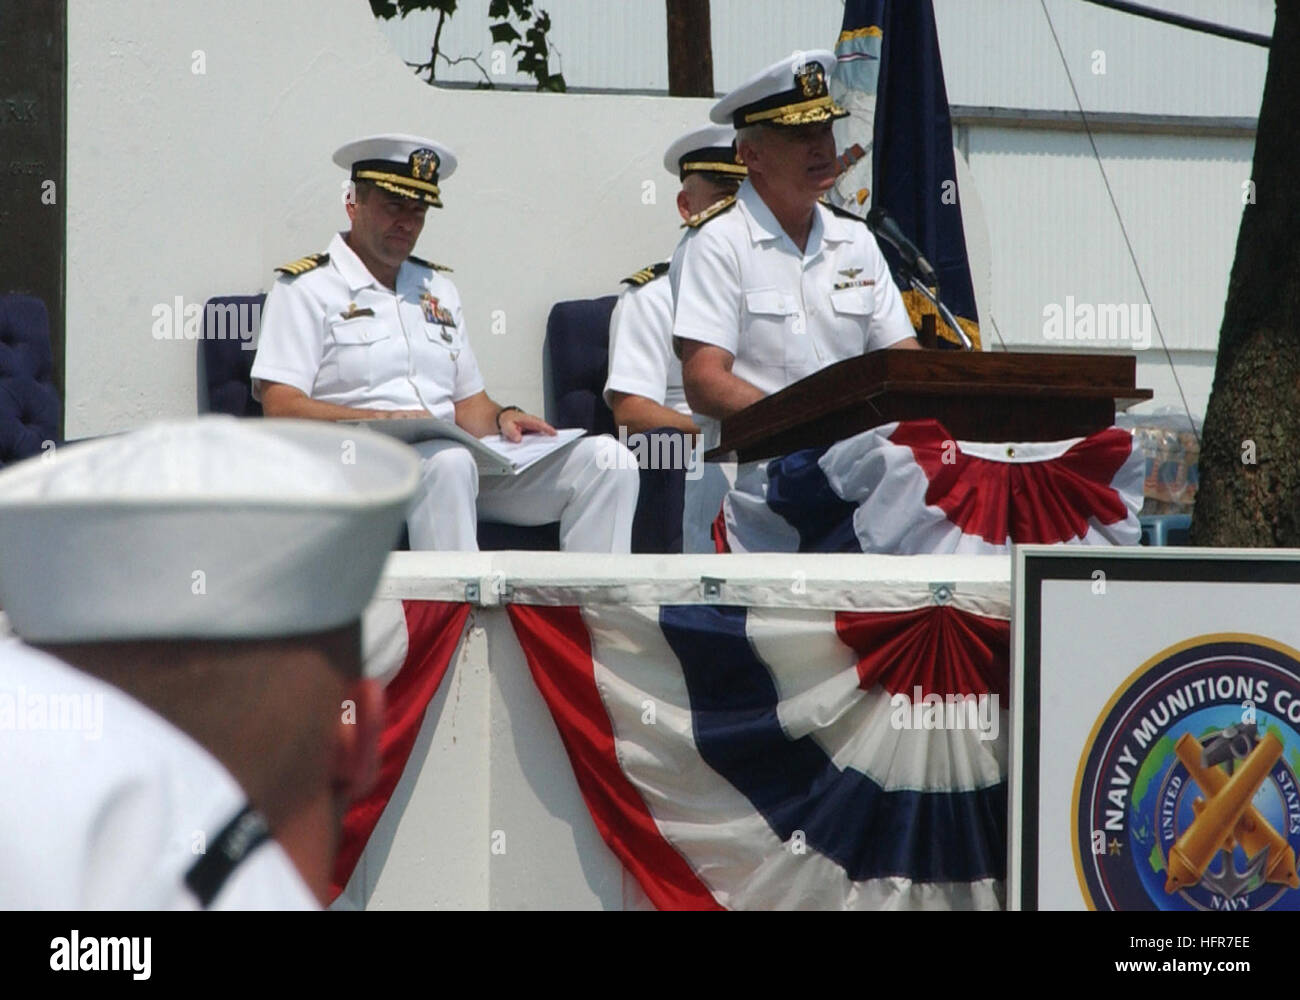 060608-N-3218H-081 Yorktown, Va. (June 8, 2006) - Commander, U.S. Fleet Forces Command, Adm. John B. Nathman, gives a speech to the guests at the establishment ceremony for the Naval Munitions Command at Yorktown. The Naval Munitions Command will align all current ashore ordnance support operations in the United States and Asia into one worldwide unit to consolidate resource requirements, standardize policies and streamline procedures for a more responsive, flexible and efficient fleet ordnance support structure. U.S. Navy photo by Photographer's Mate Airman Christopher Hall (RELEASED) US Navy Stock Photo